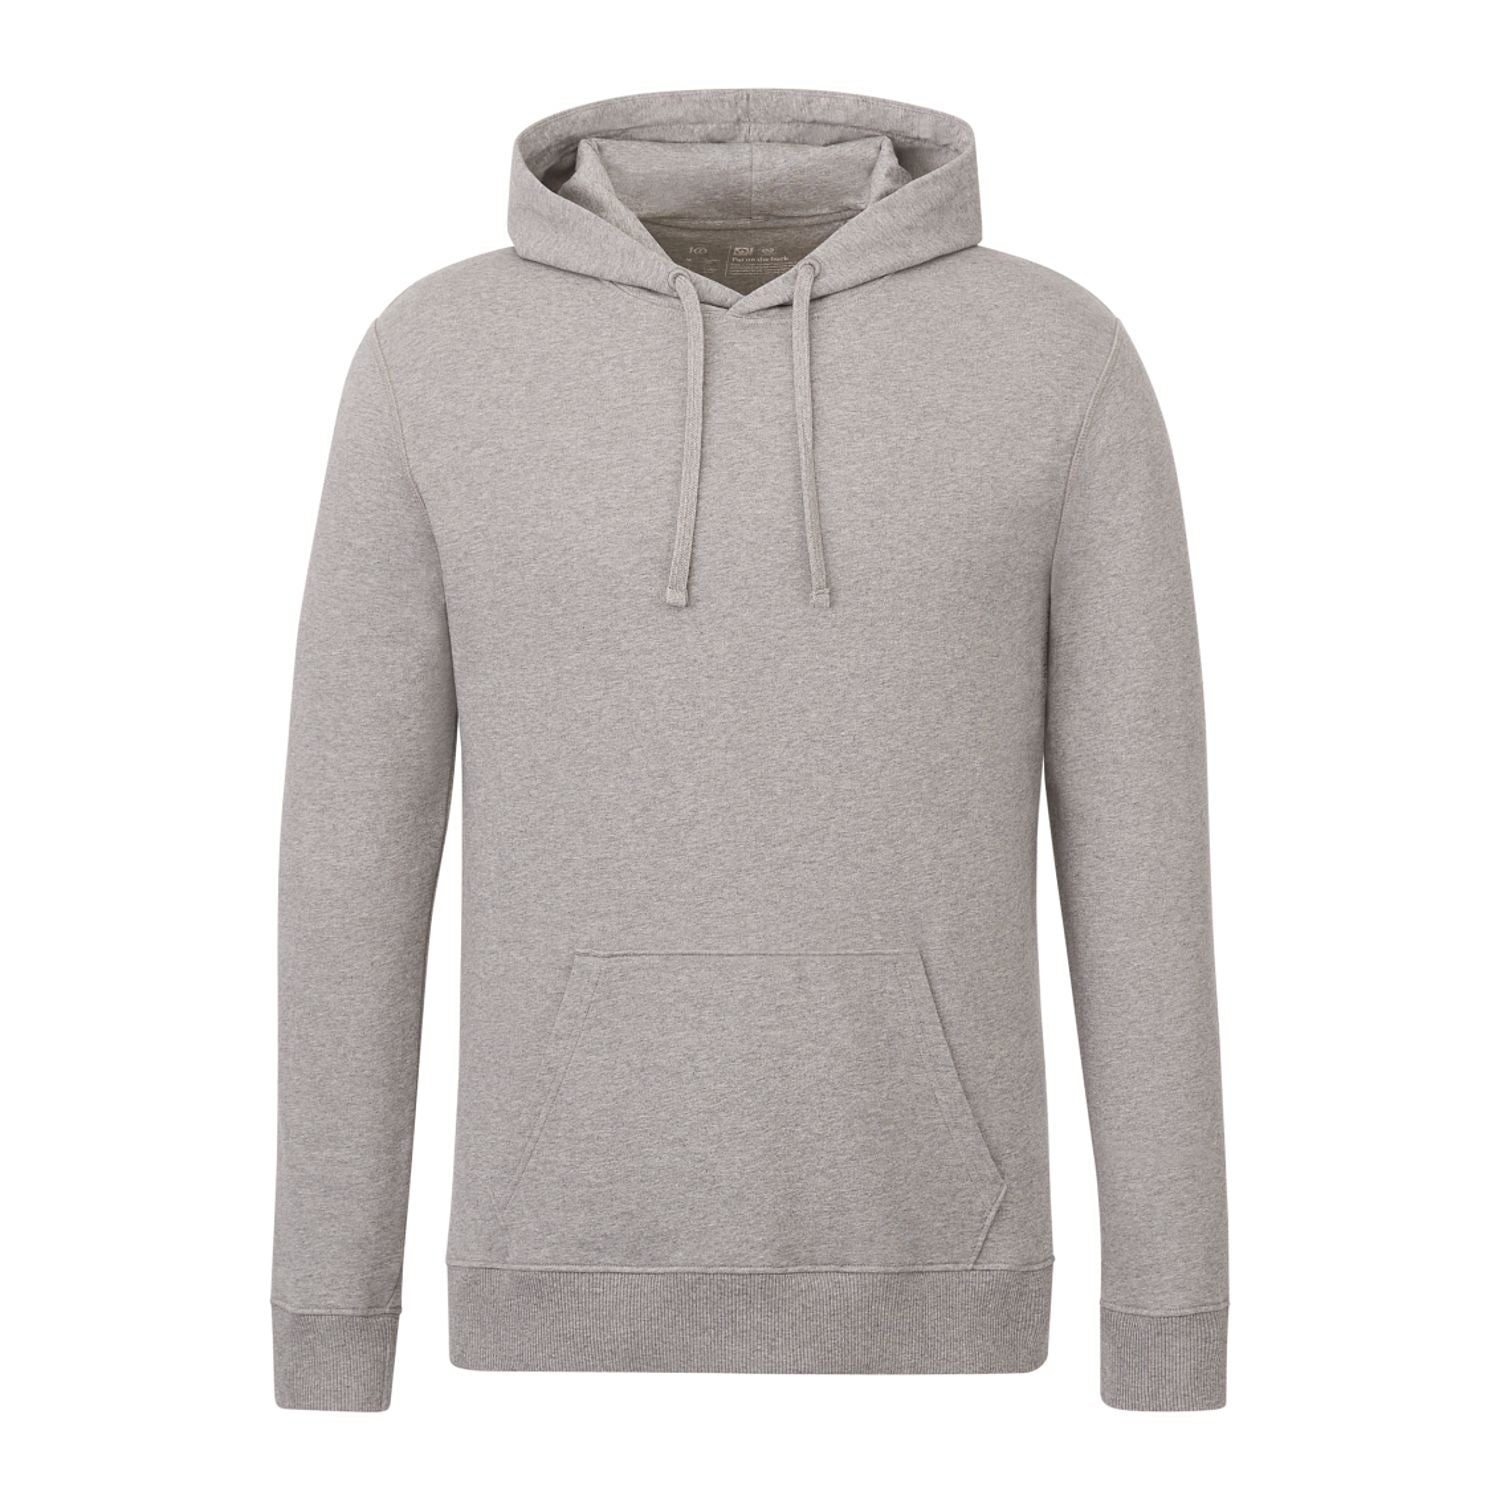 Customizable Tentree men's organic cotton french terry classic hoodie in heather gray.